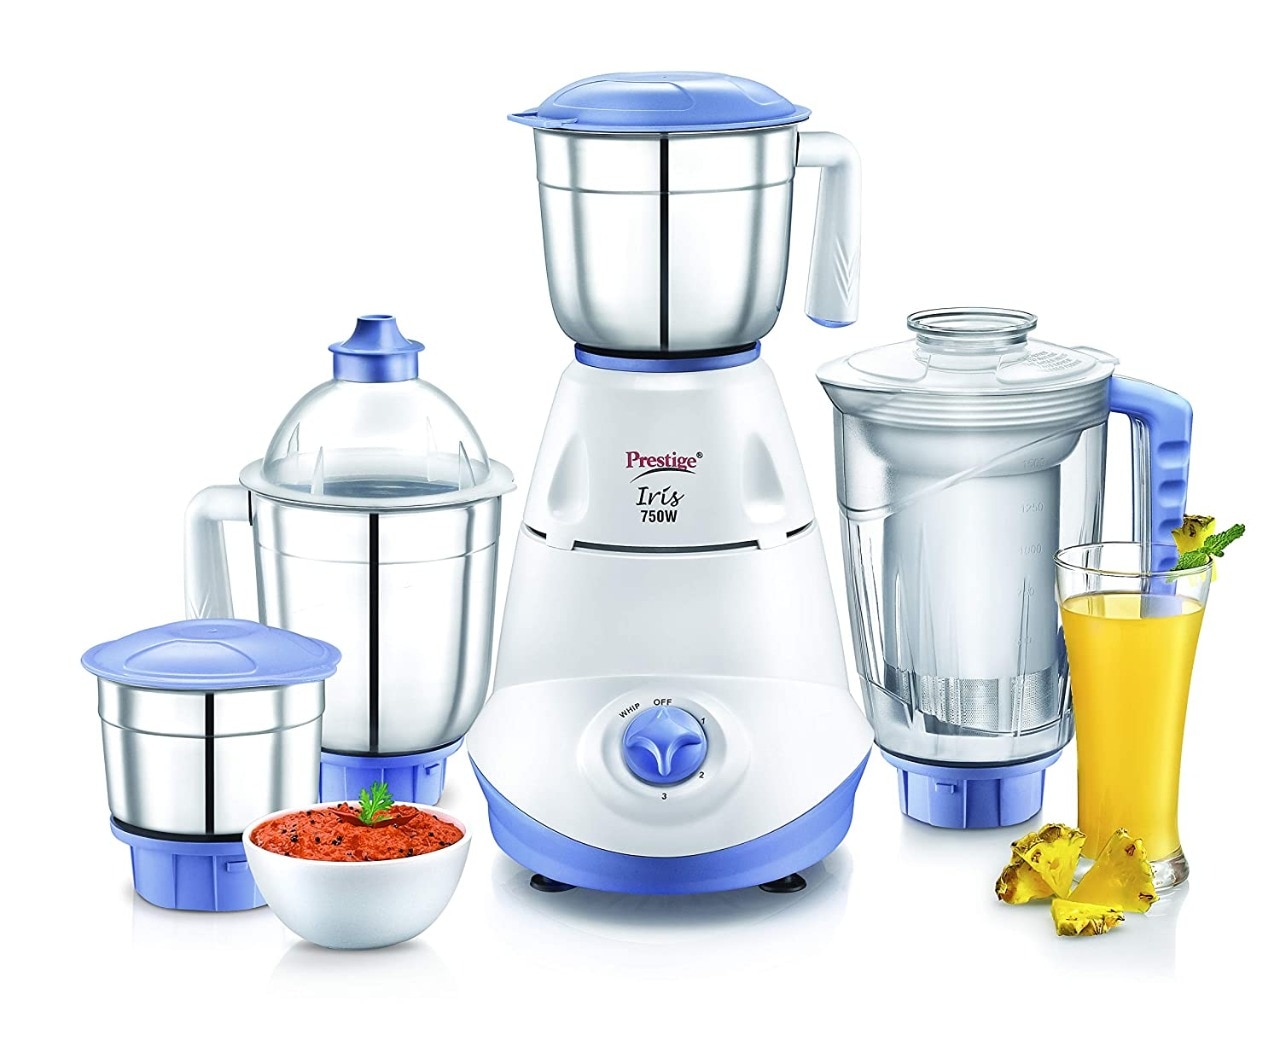 Amazon Festival Sale: Buy New Mixer Grinder For Less Than 2000, Check Top Deals